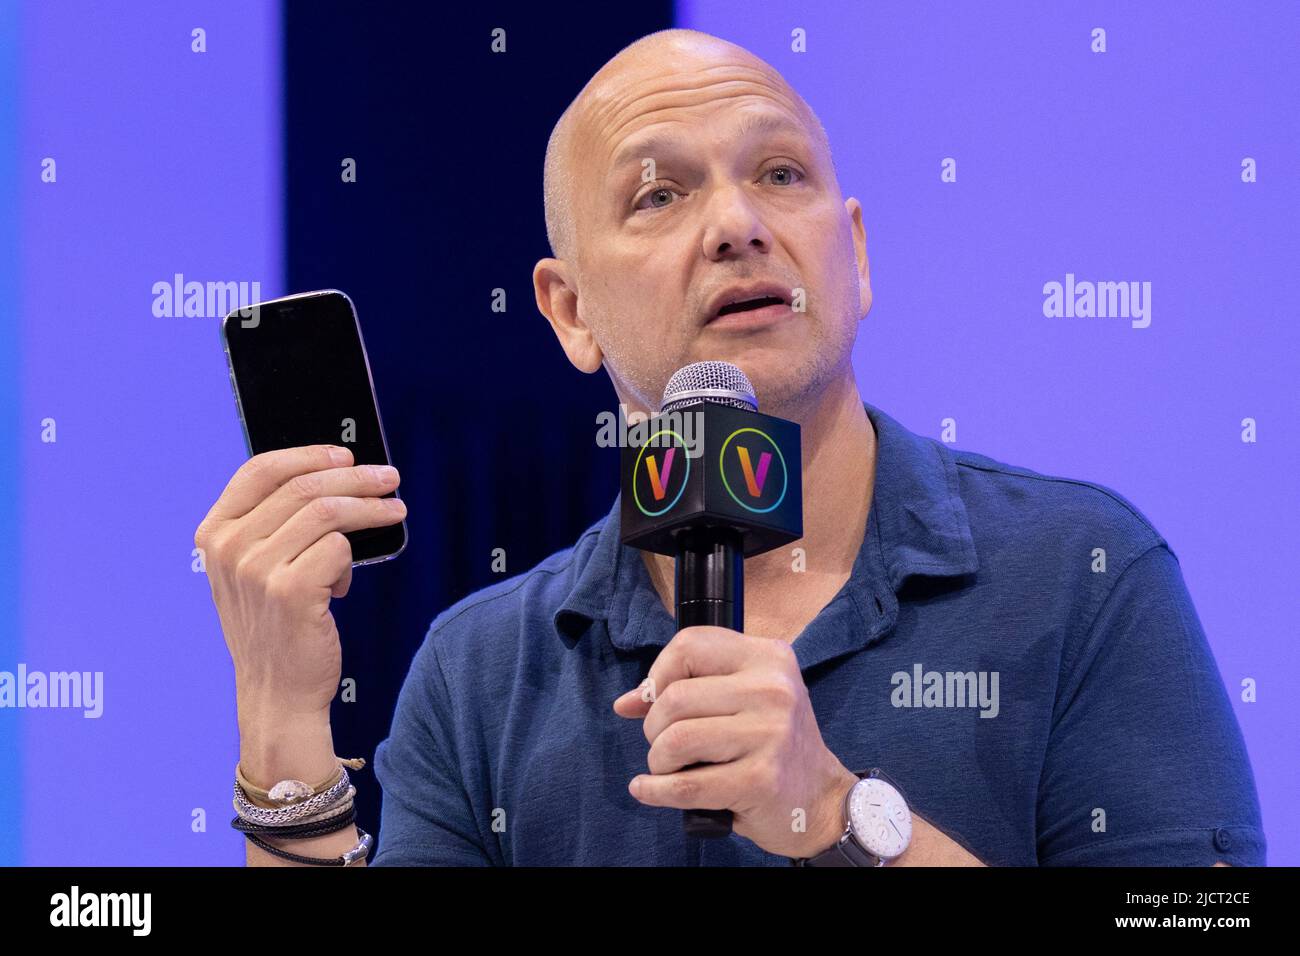 Paris, France, June 15, 2022. Iphone co inventer Tony Fadell hold an iphone as he speaks during the Viva Technology fair 2022 (Vivatech) in Paris, on June 15, 2022. Photo by Raphael Lafargue/ABACAPRESS.COM Stock Photo